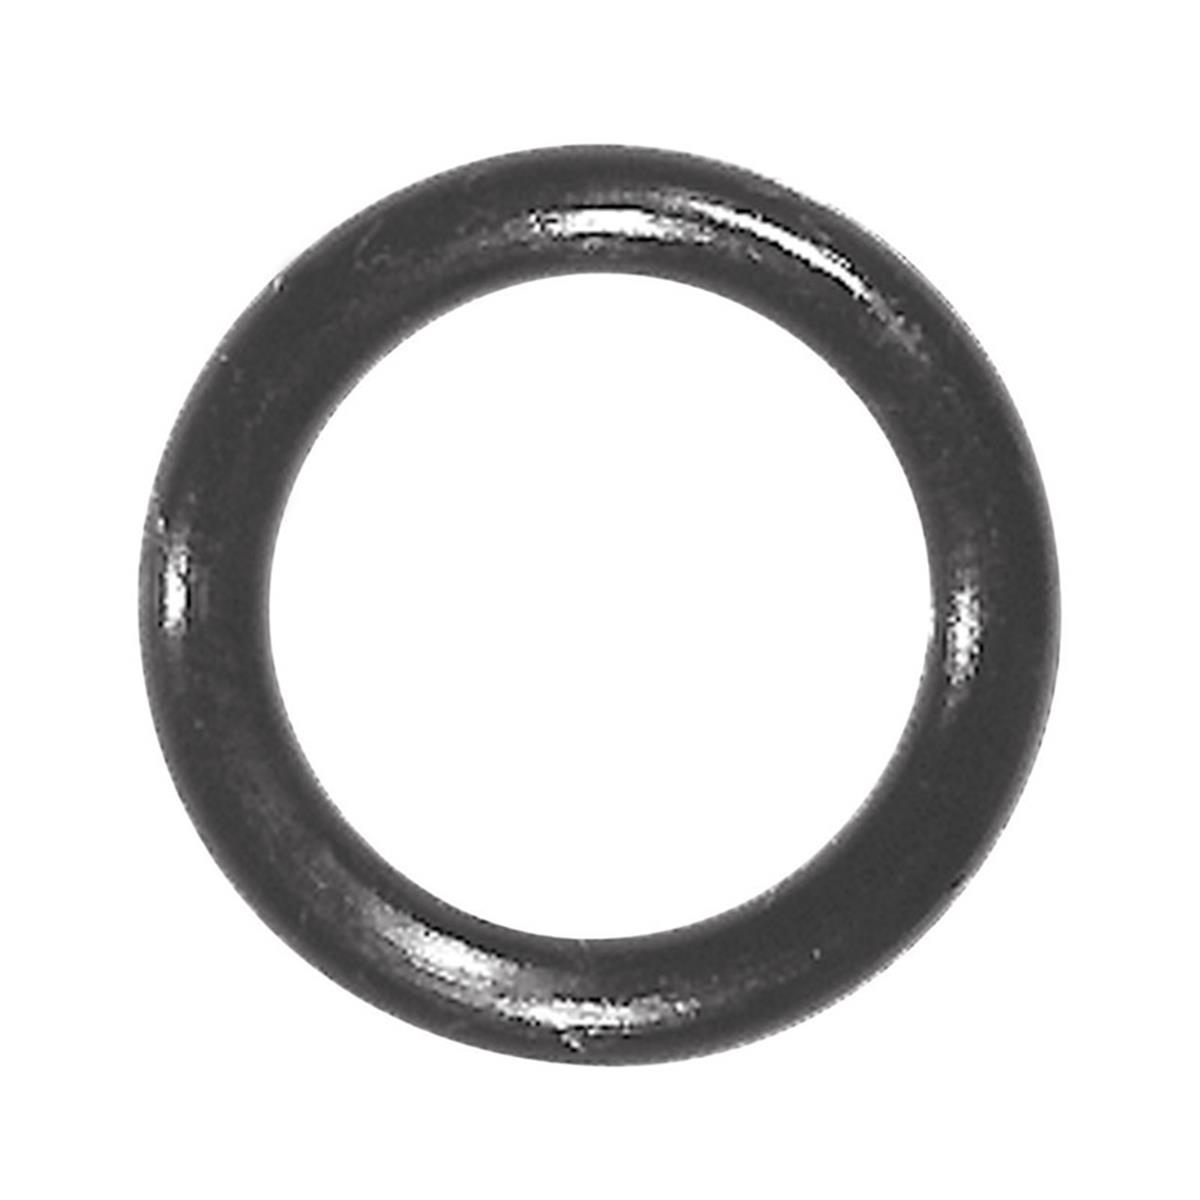 35756b 0.68 X 0.5 X 0.09 In. O-ring Faucet- Pack Of 5